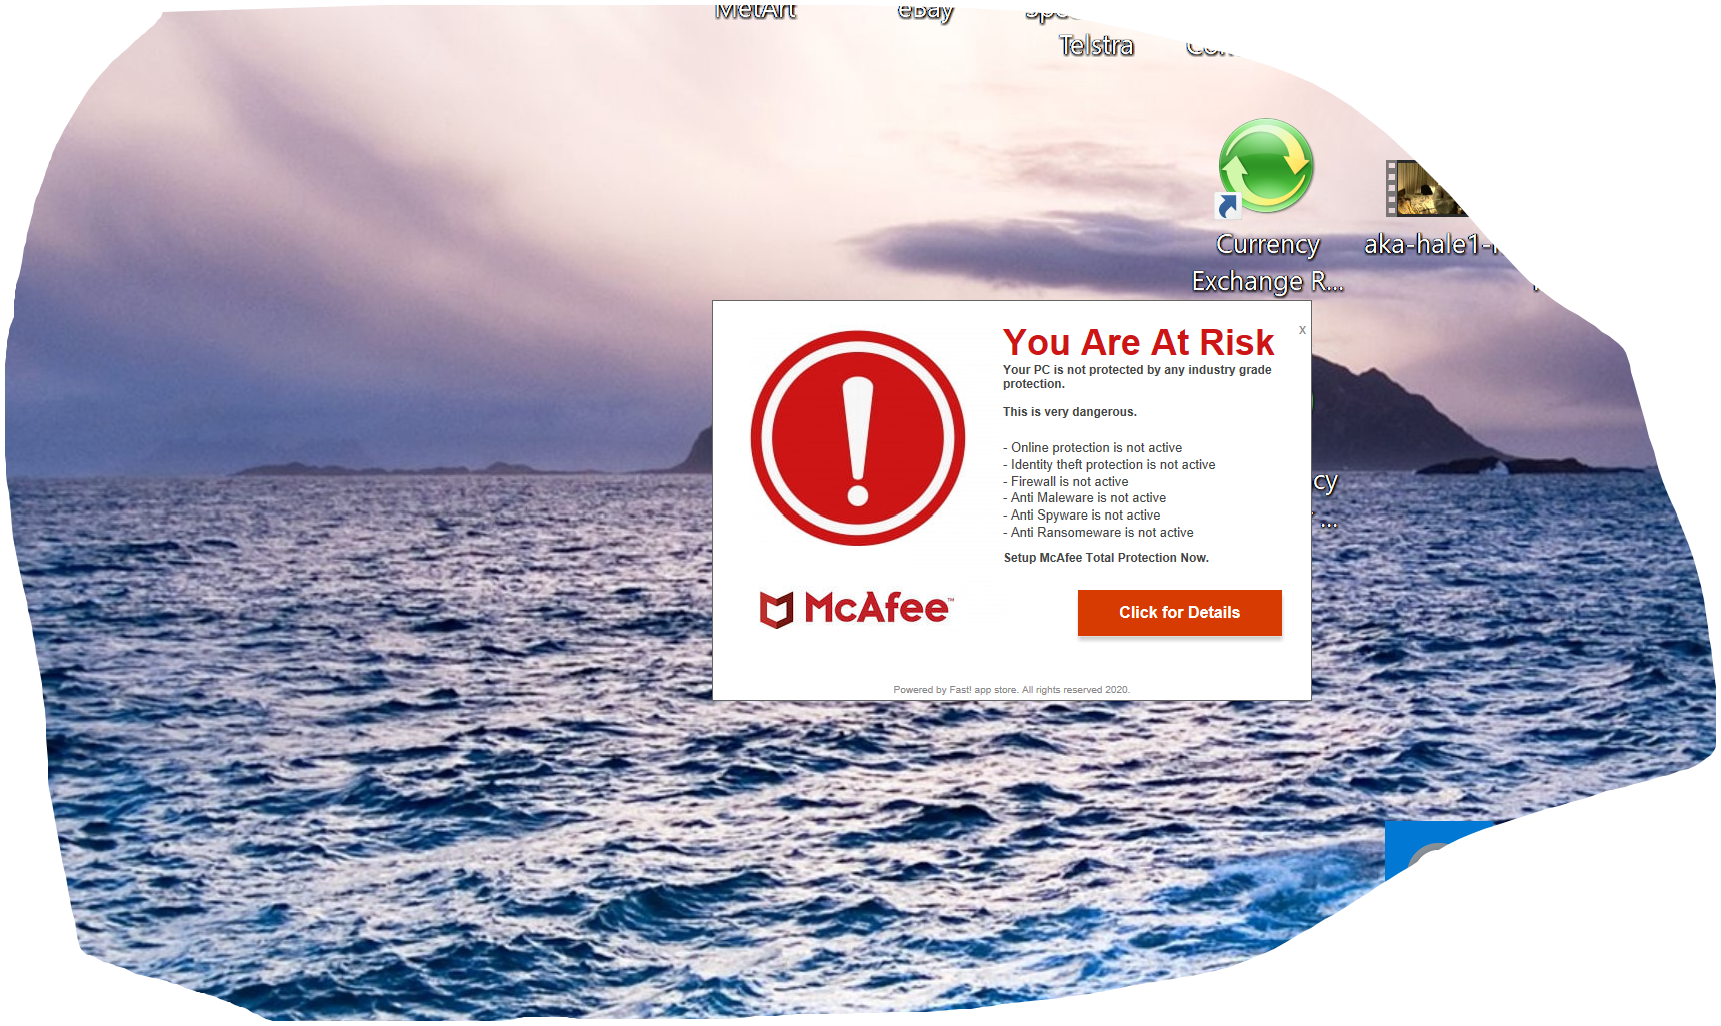 Fake pop ups from mcafee and microsoft - Microsoft Community